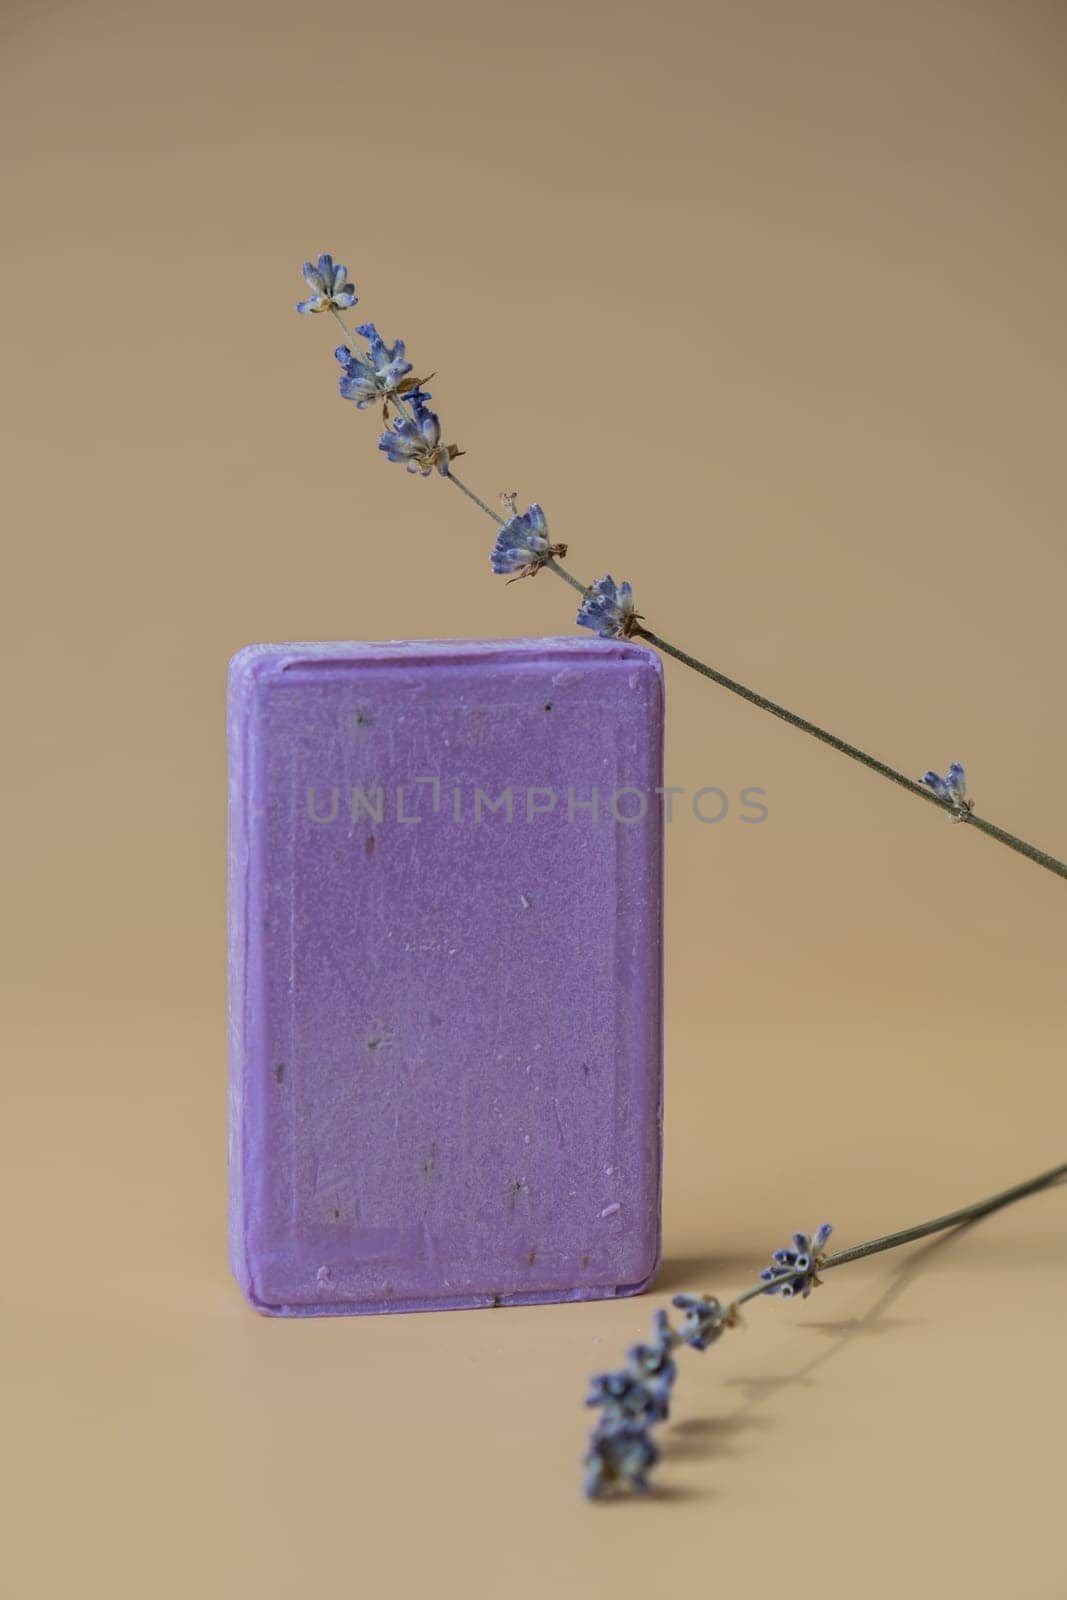 Handcrafted purple lavender soap with lavender flowers. Natural hydrating moisturiser softness cosmetic. Organic calming beauty skincare product. Herbal self care wellness alternative soap by anna_stasiia